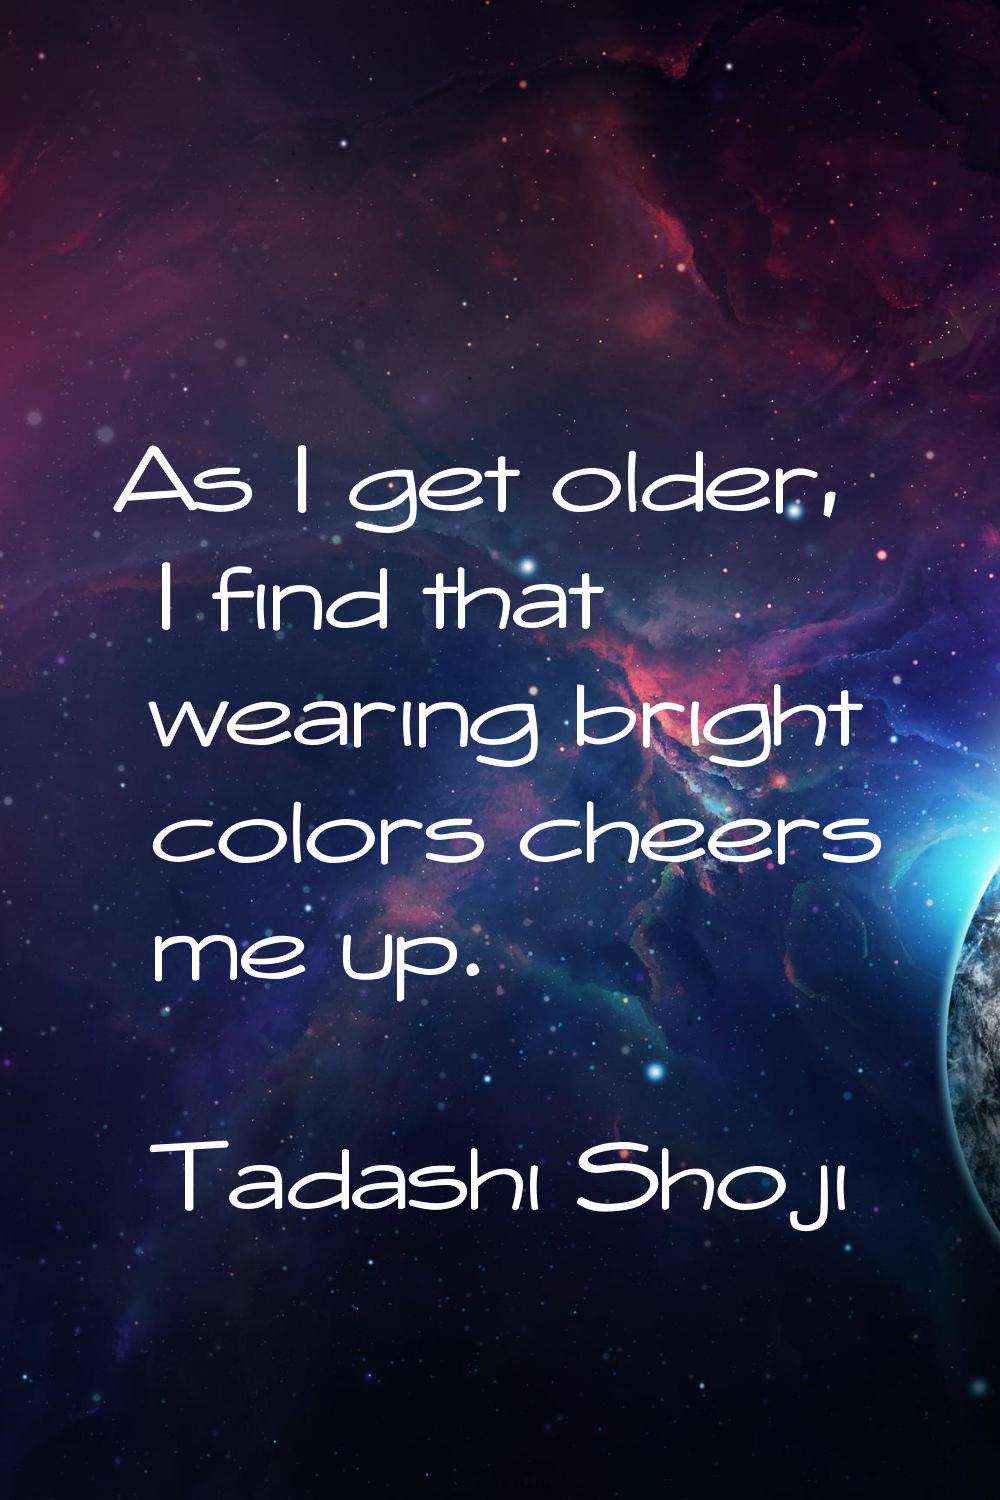 As I get older, I find that wearing bright colors cheers me up.